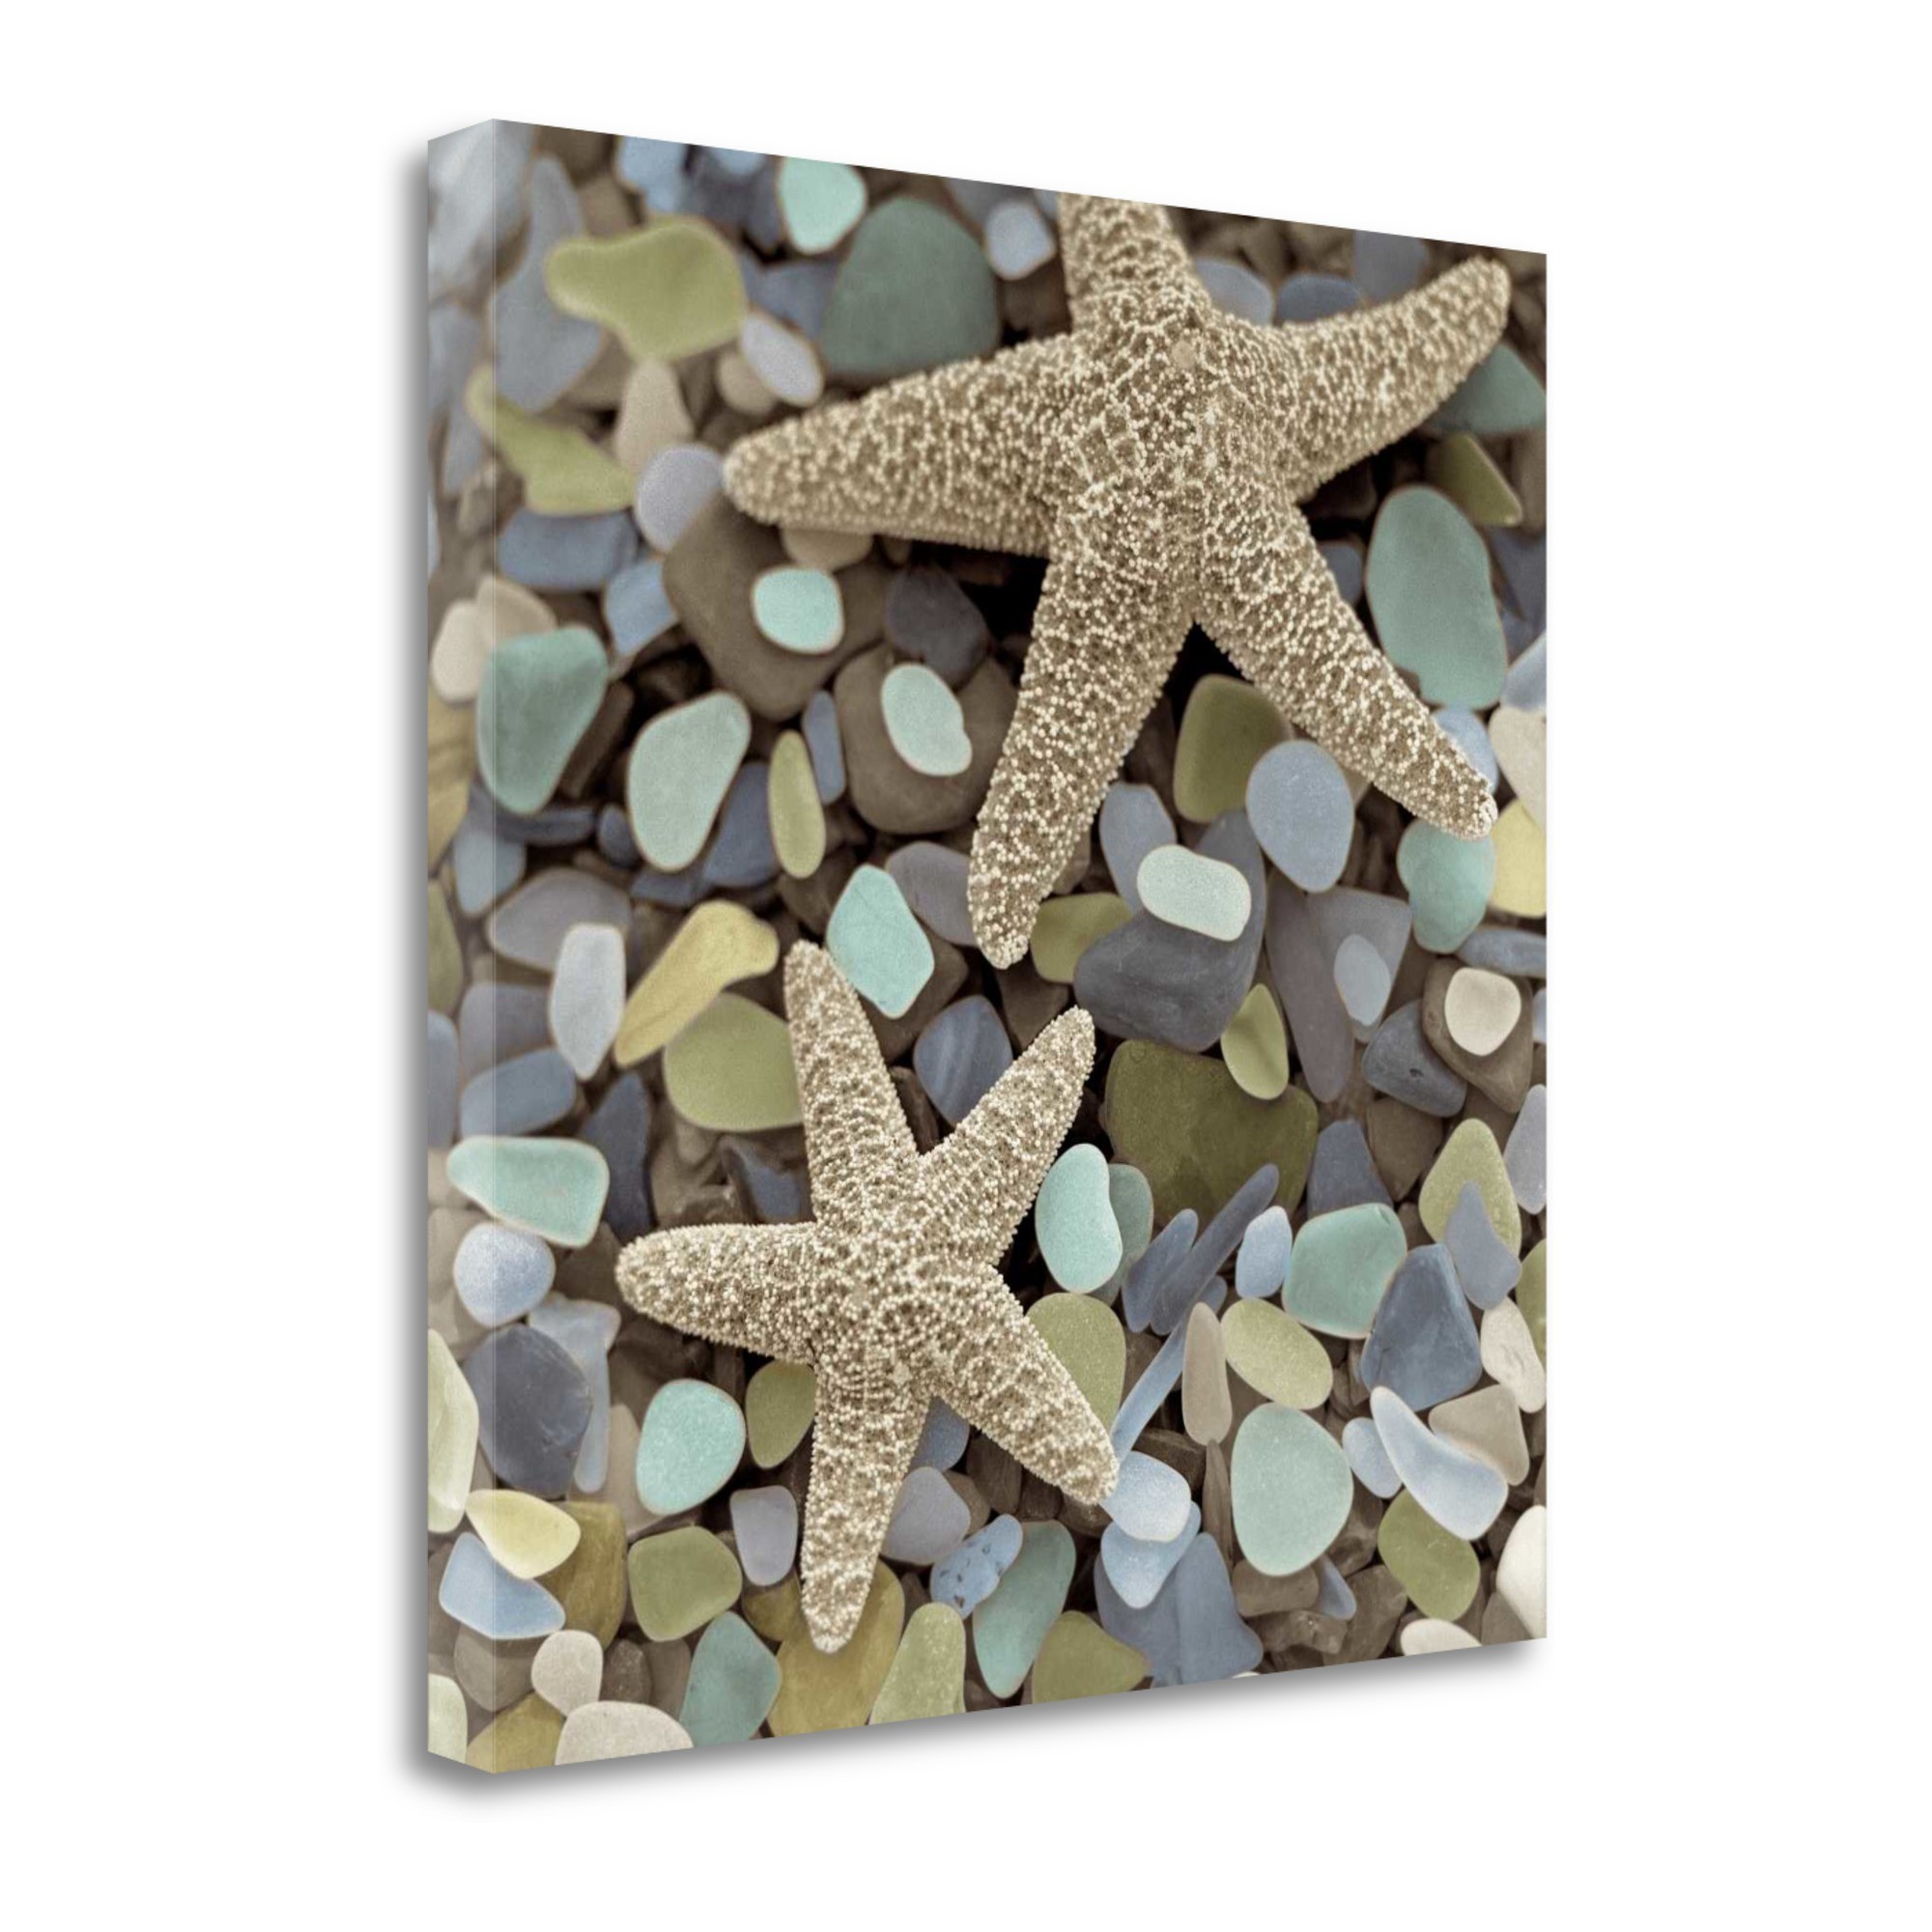 11" Two Starfish and Seaglass 3 Giclee Wrap Canvas Wall Art